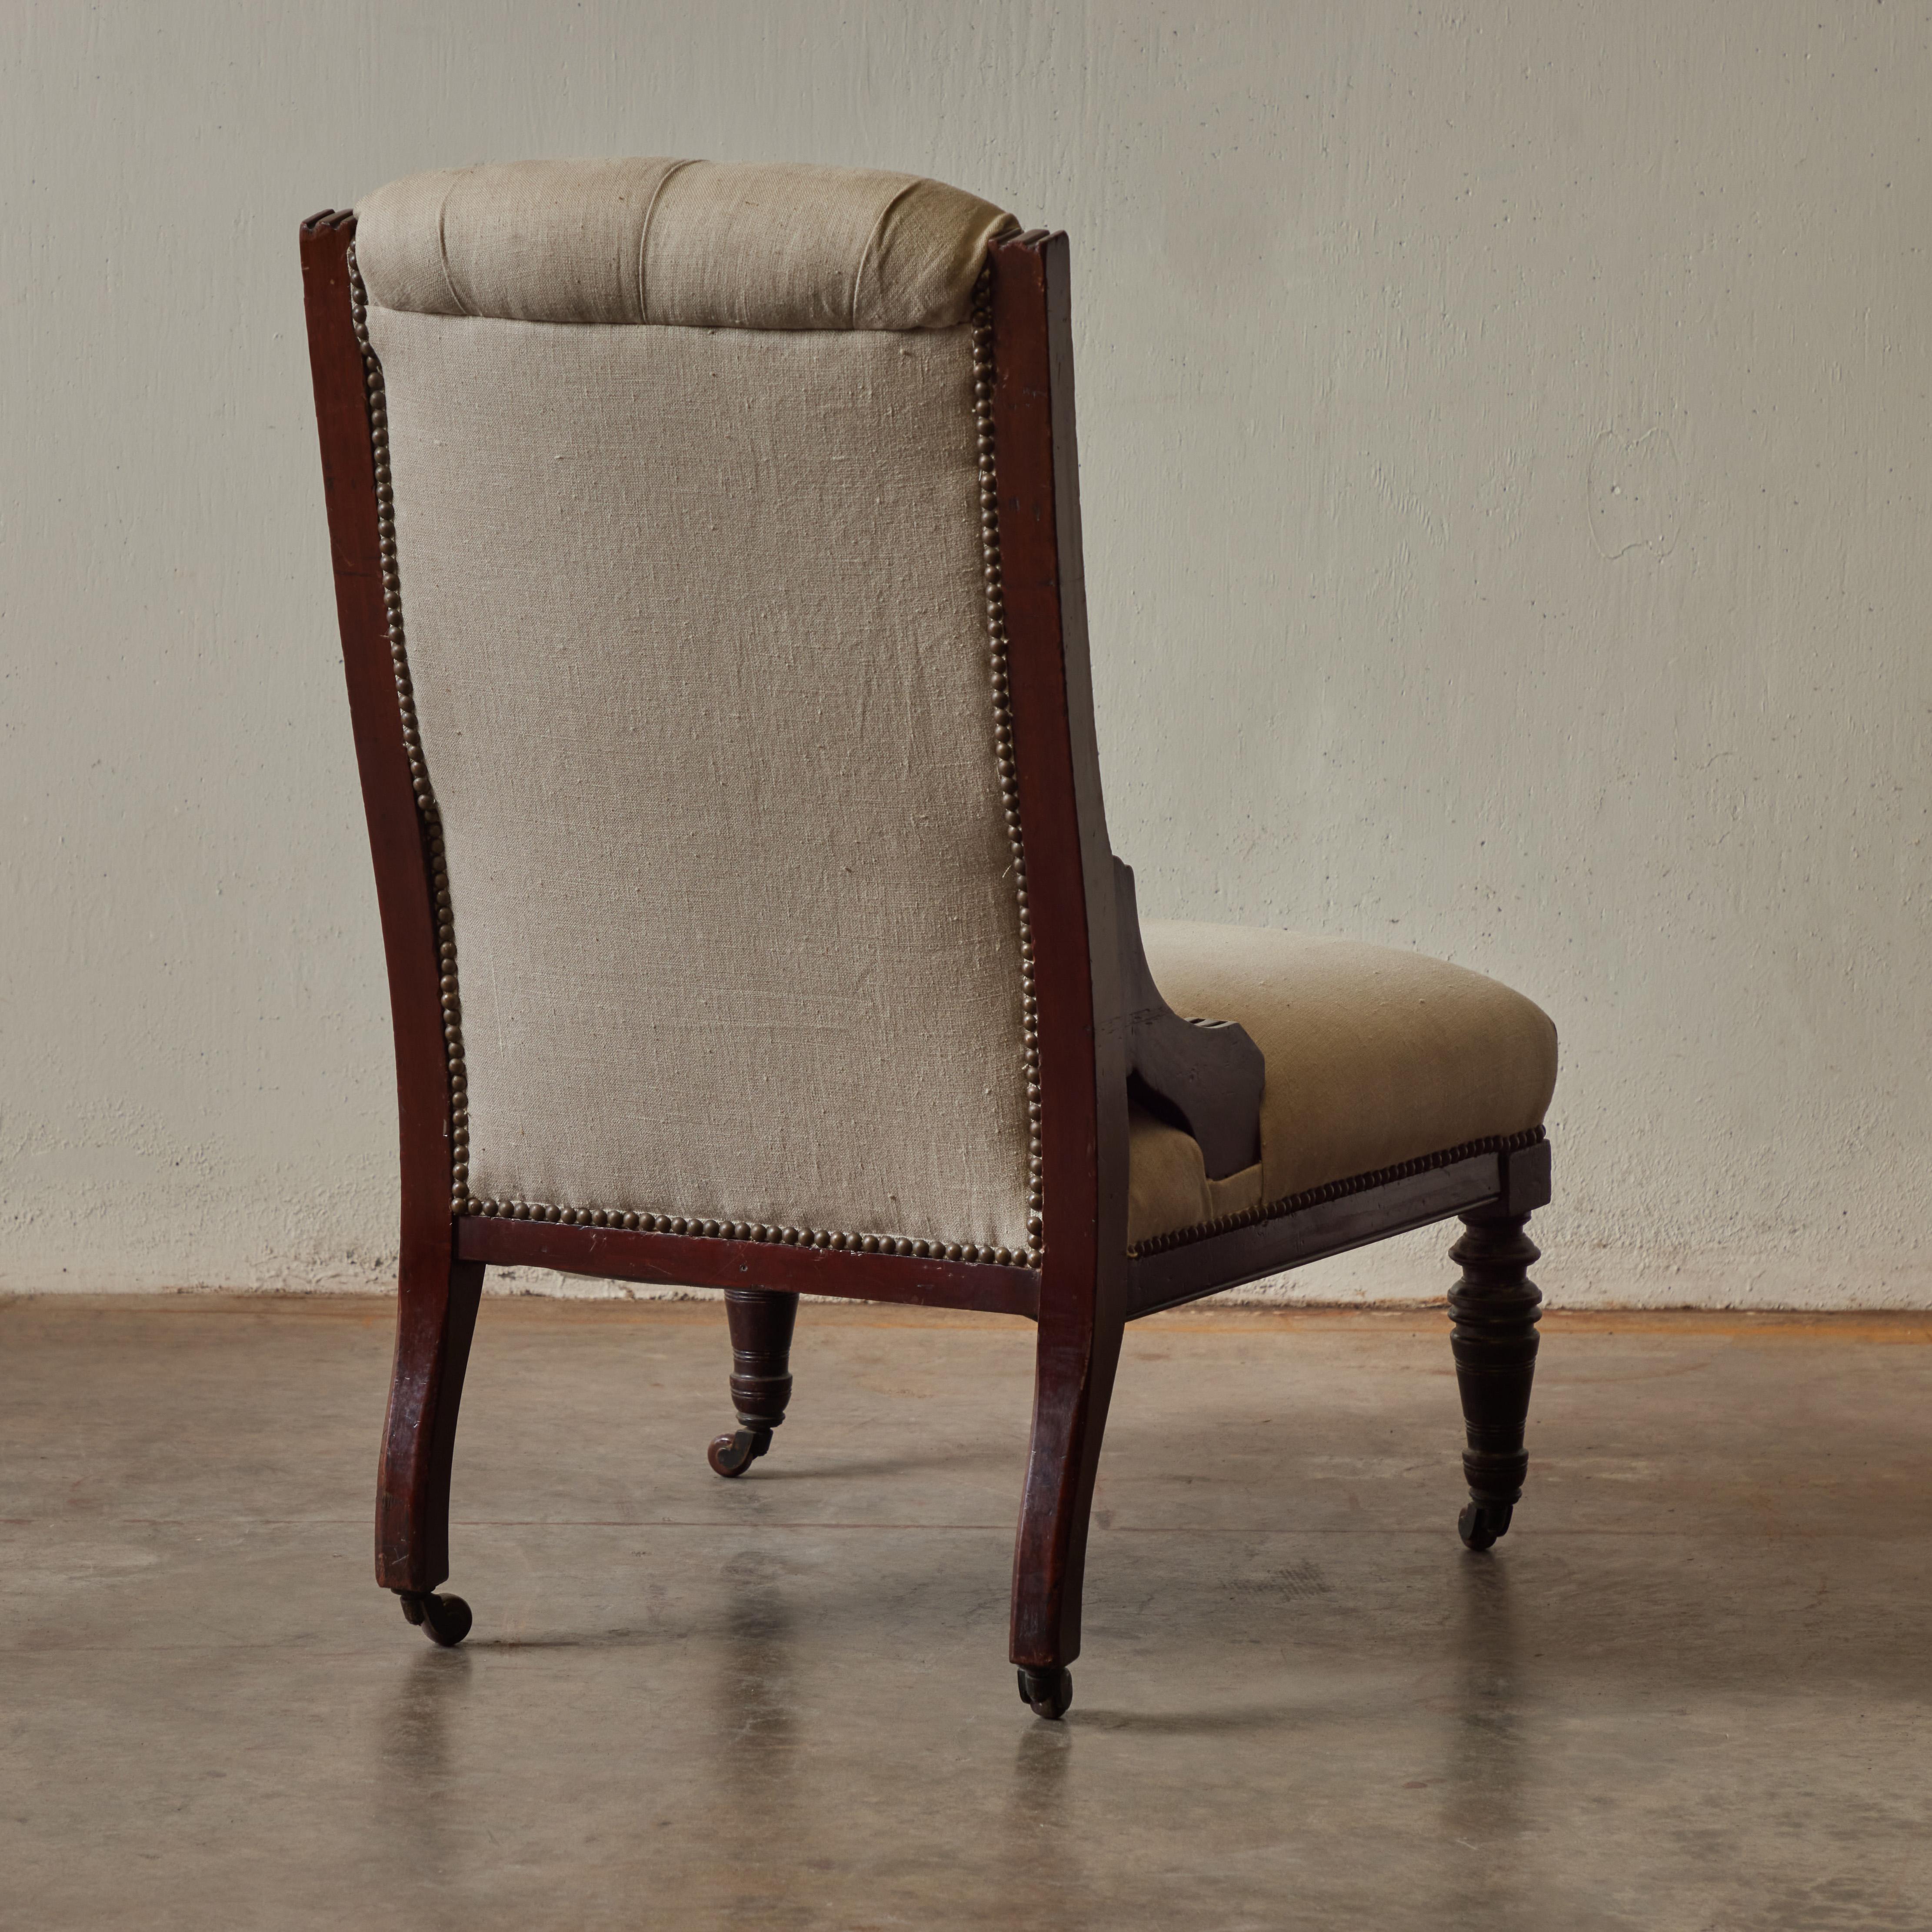 Late 19th Century 19th Century English Slipper Chair For Sale